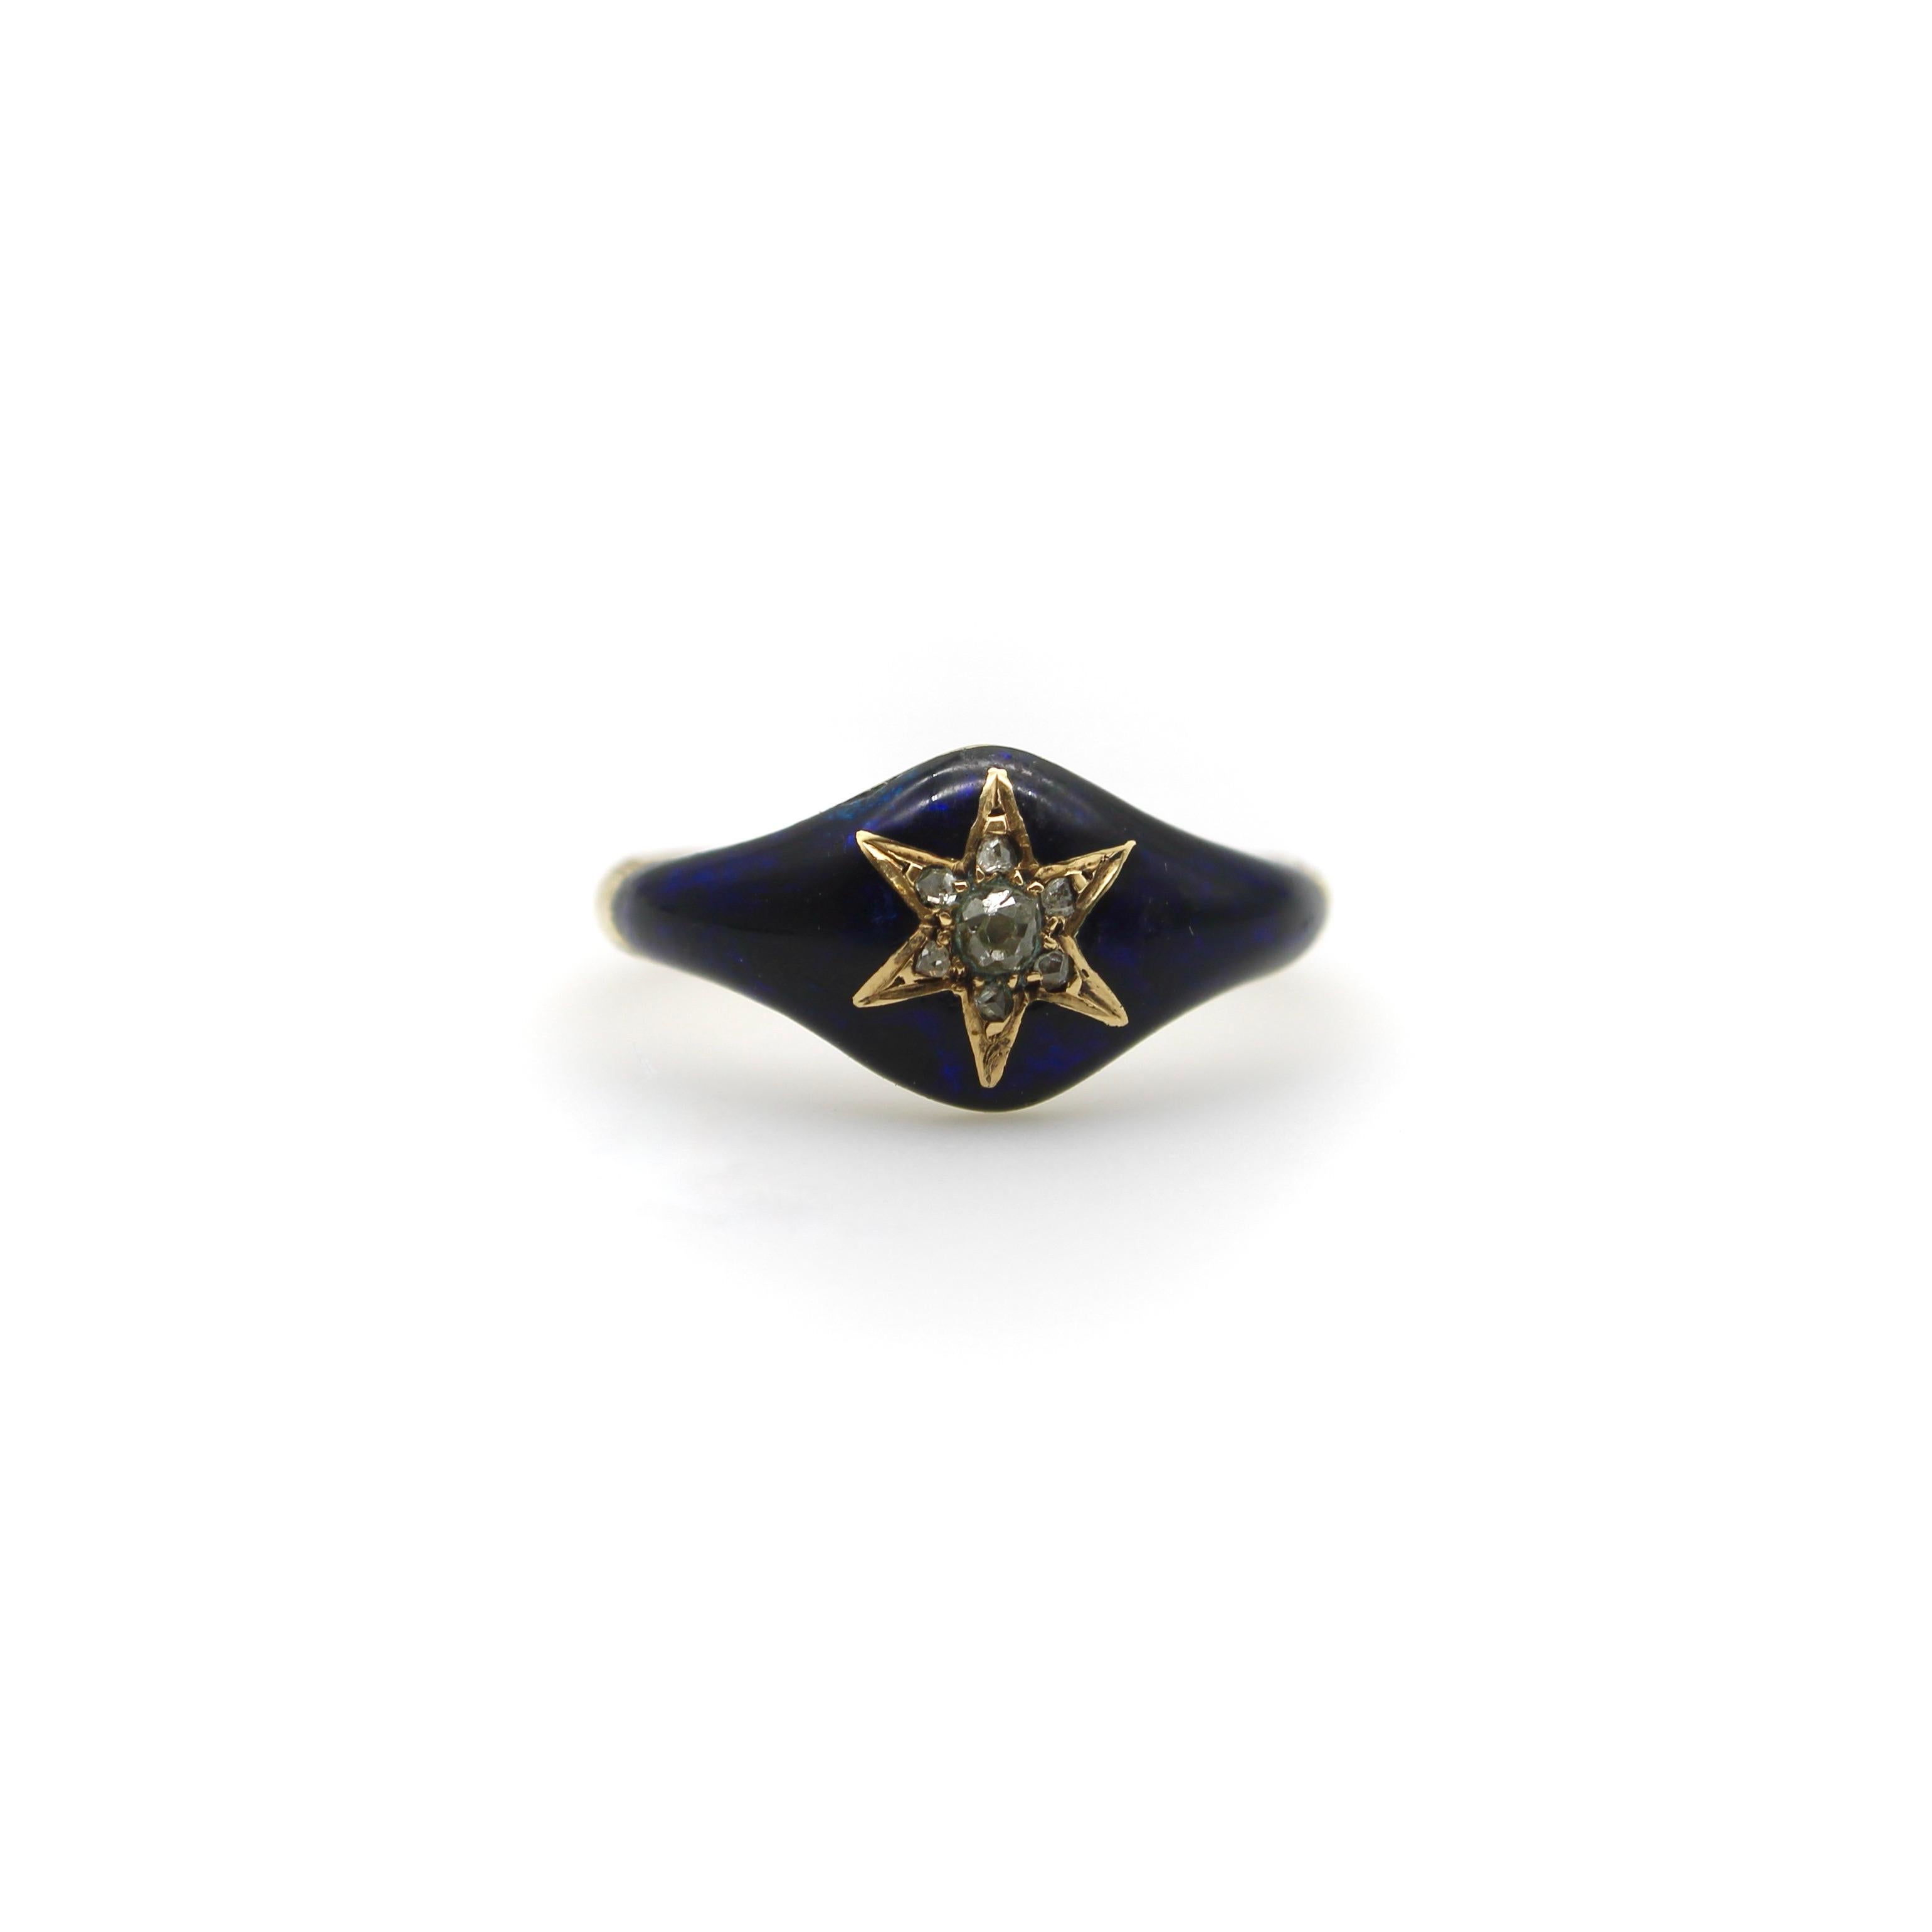 This 15k gold early Victorian ring features a diamond encrusted star surrounded by navy blue enamel. Seven diamonds are bead set into a beautifully carved out star that is the focal point of the ring. The center diamond is an oblong shaped Old Mine